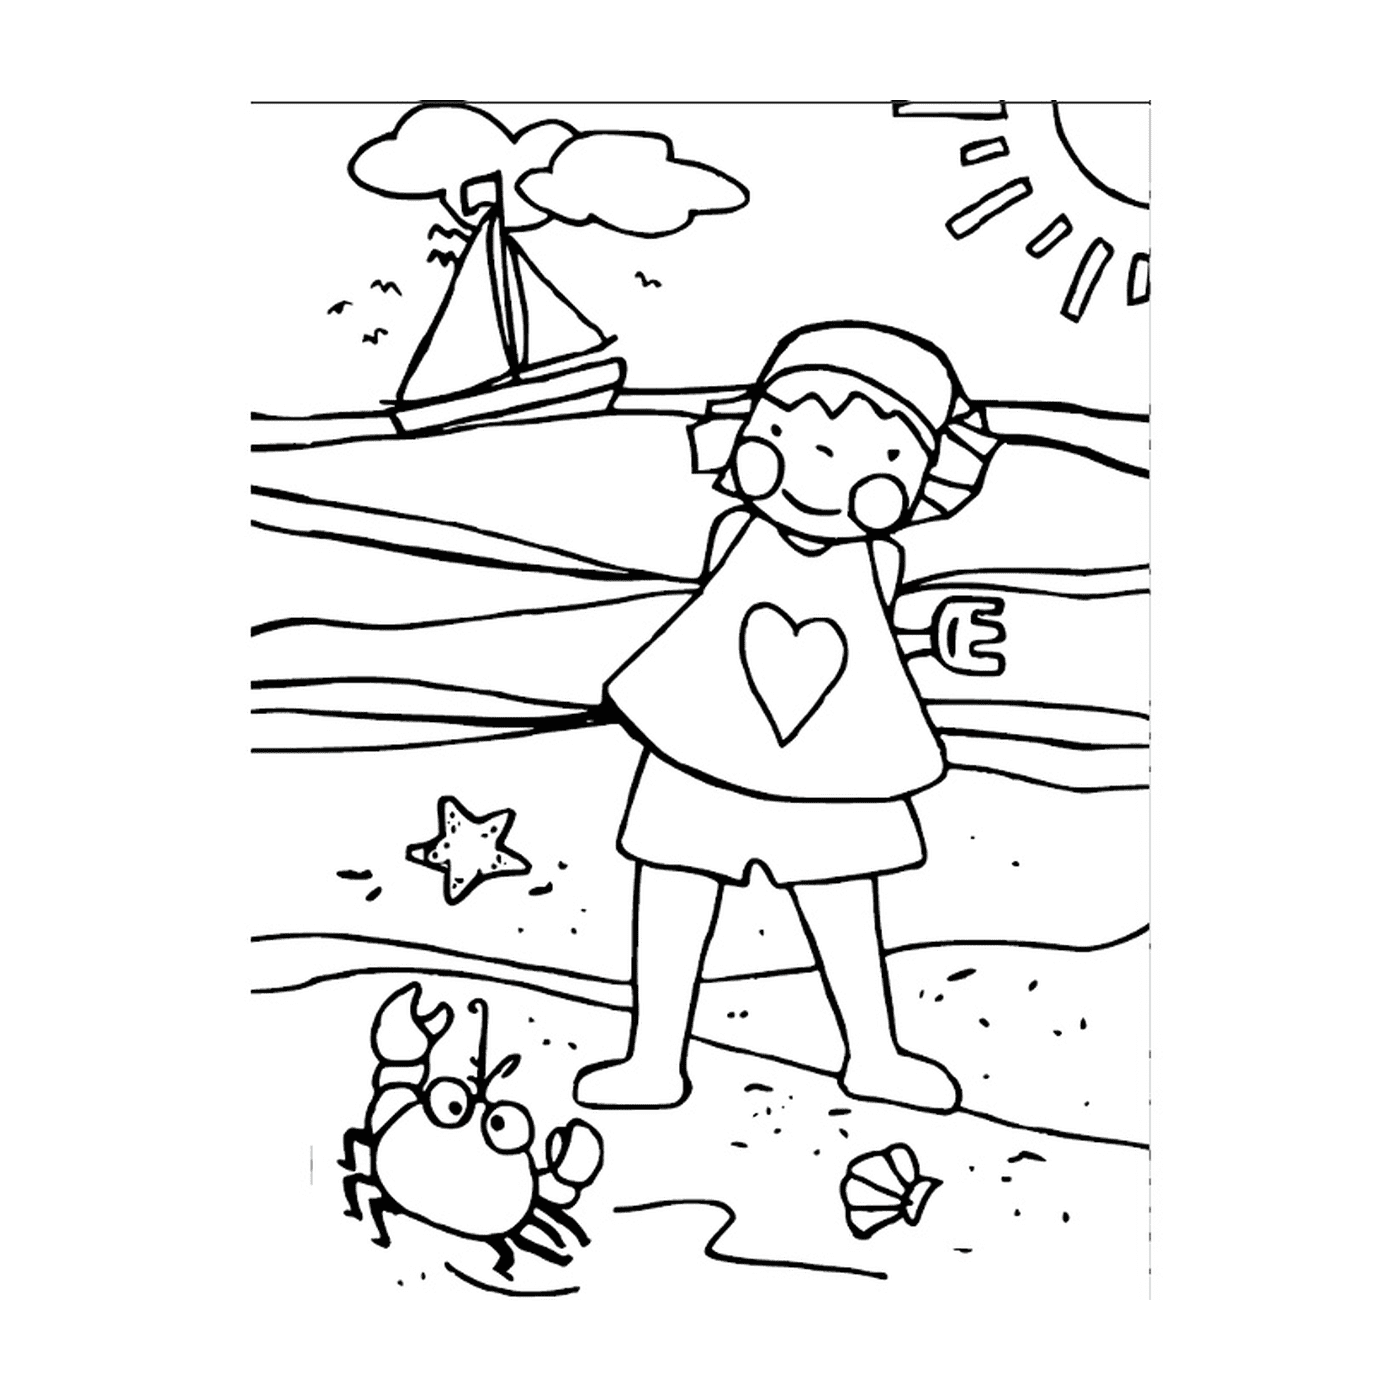  A child standing on the beach with a crab 